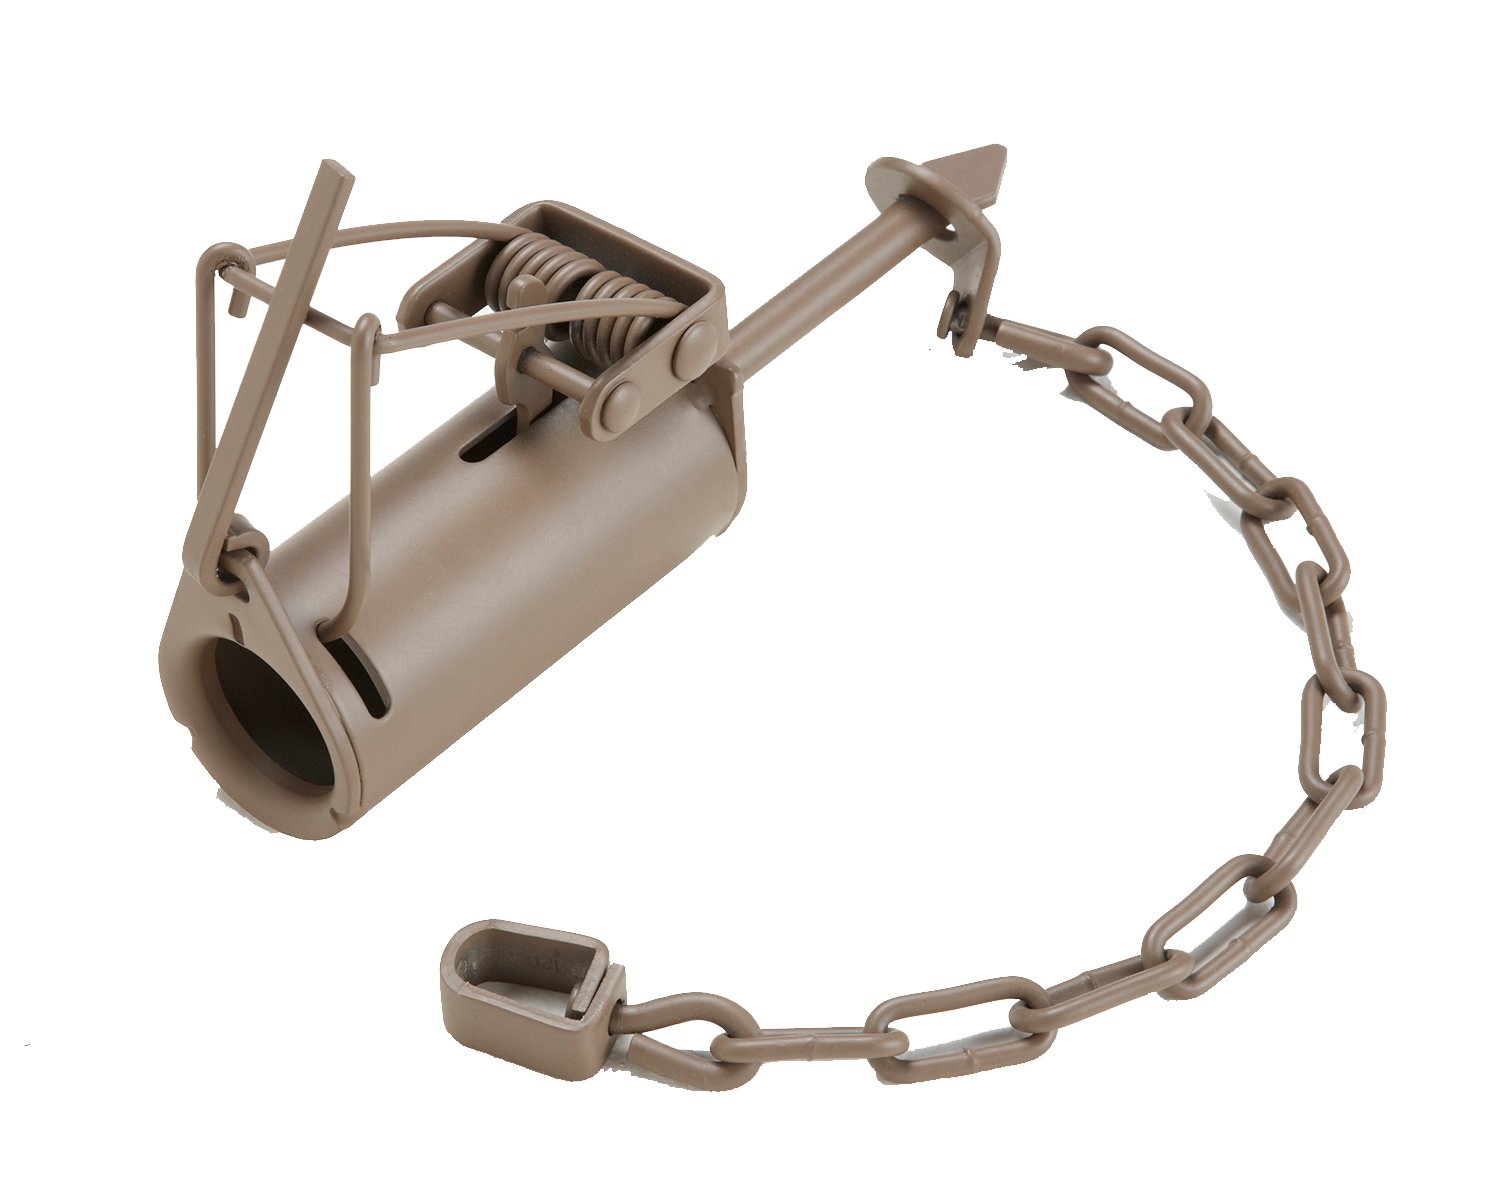 Dog Proof Coon Trap, Brown – G&DFarms